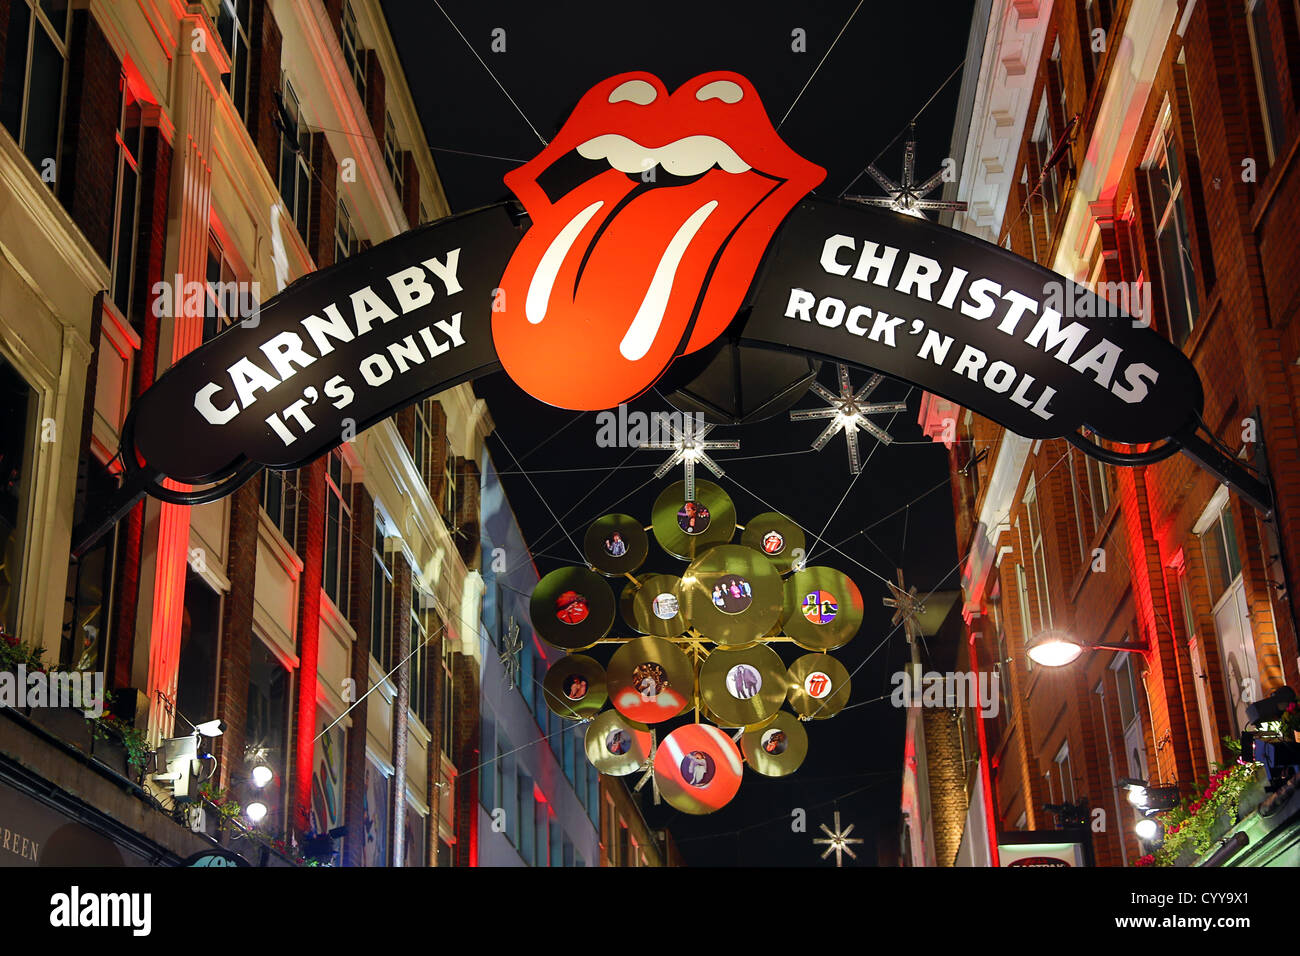 London, UK. 12th November 2012. Christmas Lights and decorations in Carnaby Street with a Rock n Roll records theme, London Stock Photo